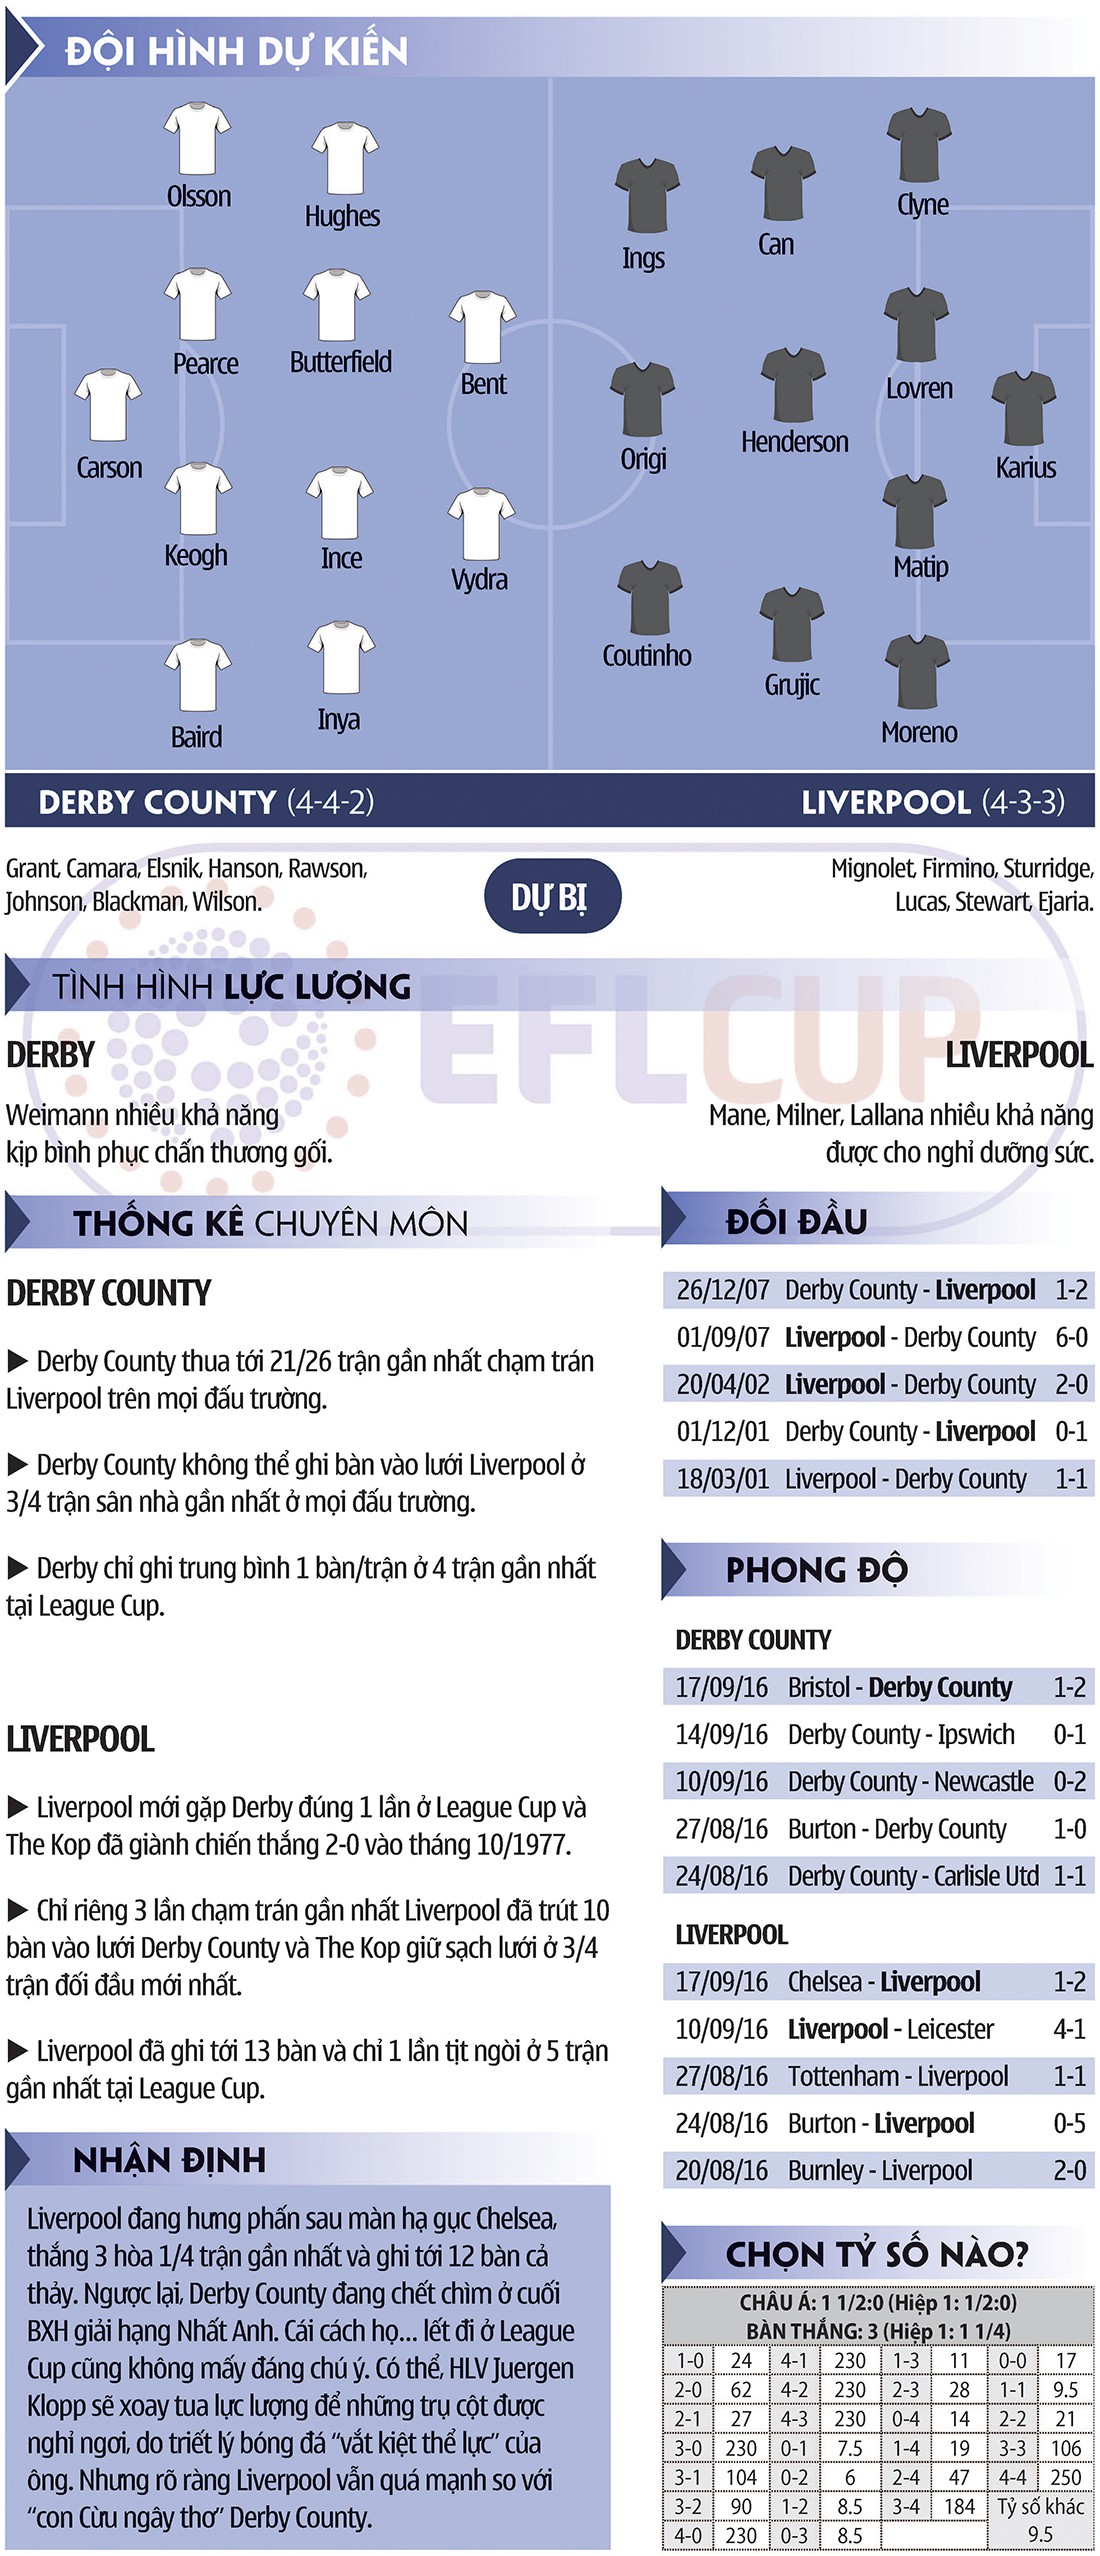 Derby County - Liverpool: So găng trong khung gỗ